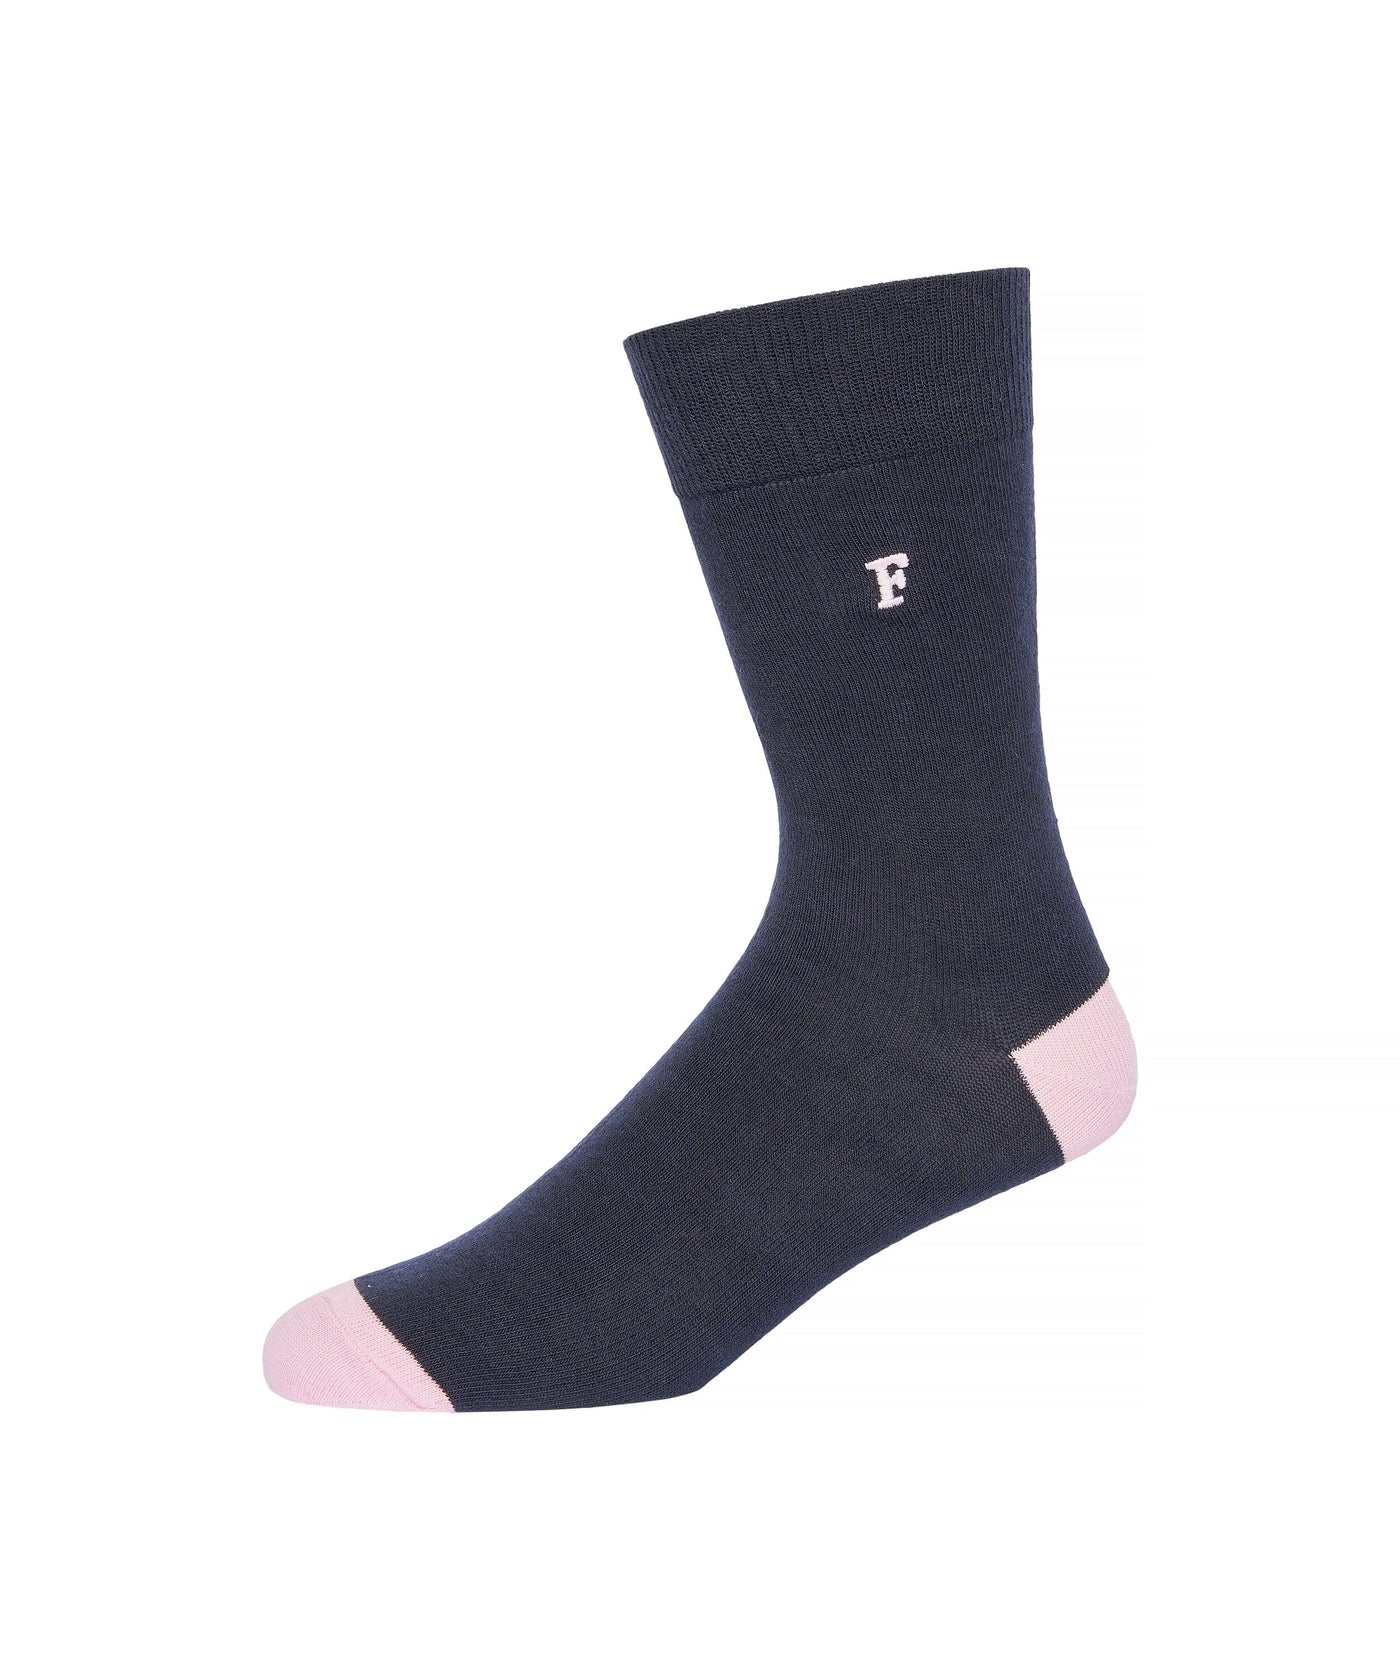 French Connection Waterfall Socks 3pk Pink Multi